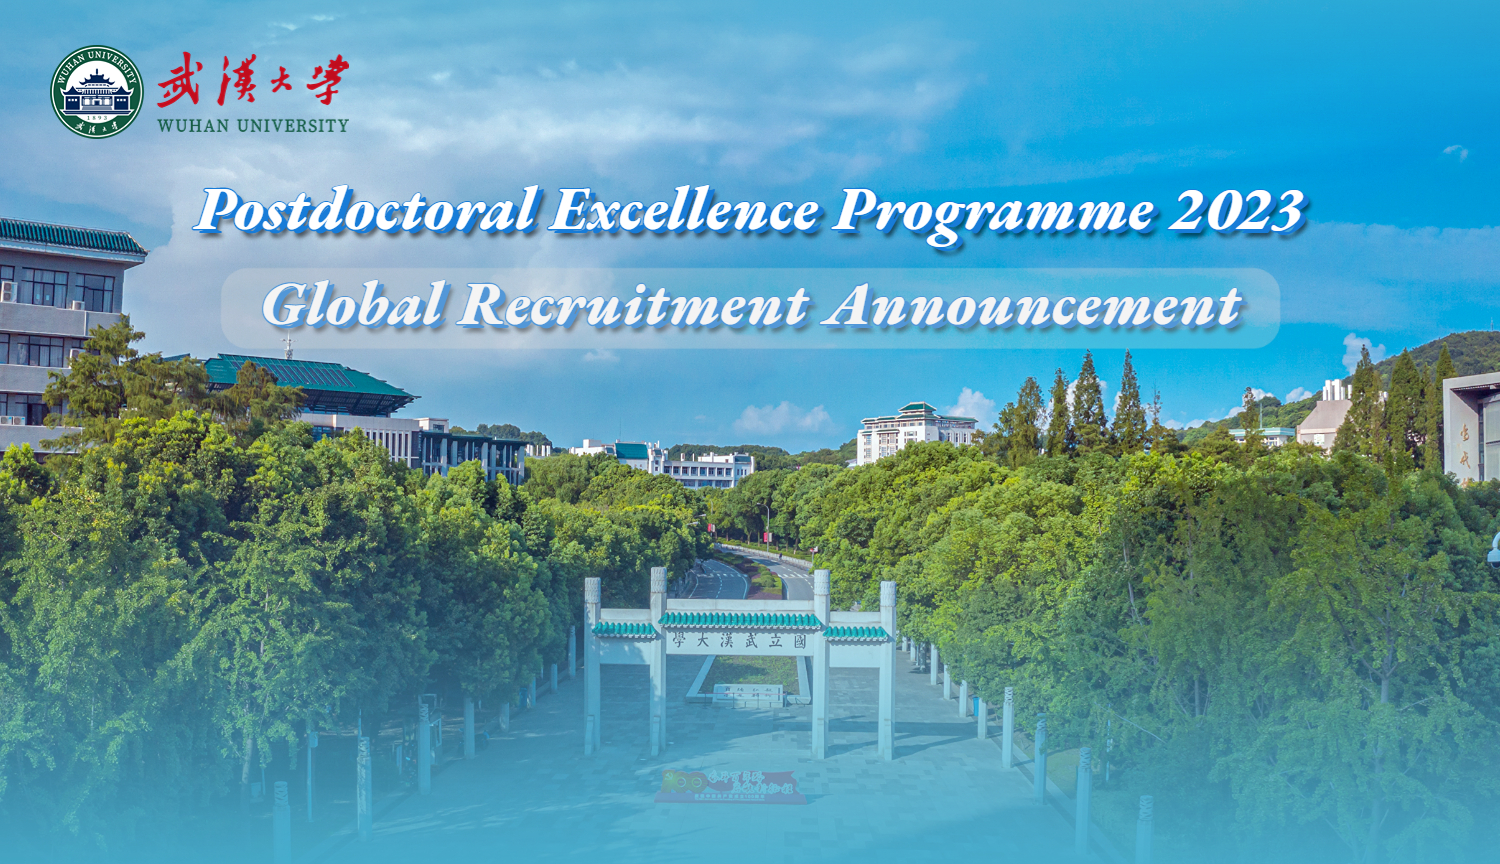 Wuhan University Postdoctoral Excellence Programme 2023 Global Recruitment Announcement